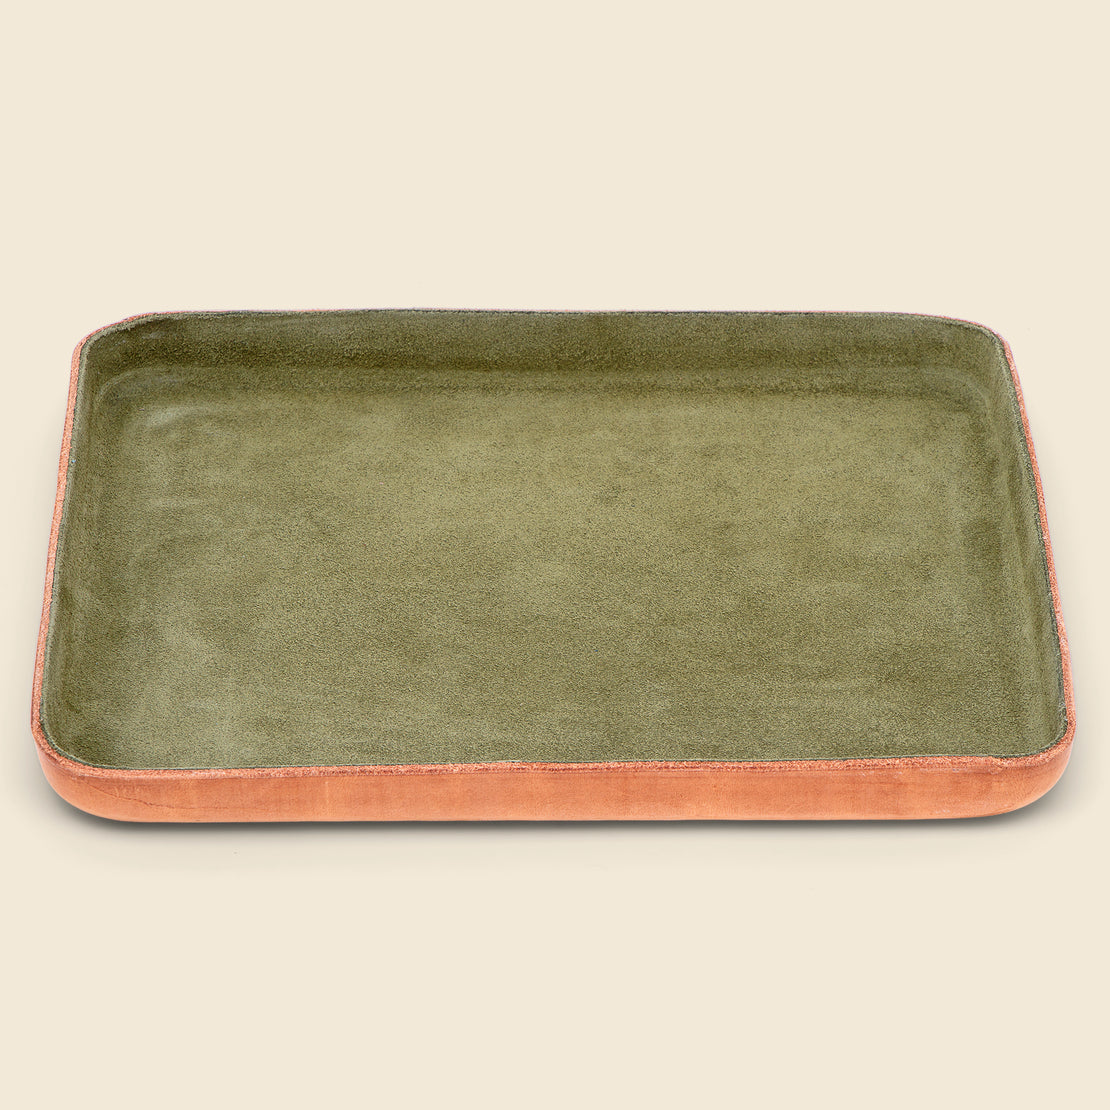 Home Large Suede Tray - Olive